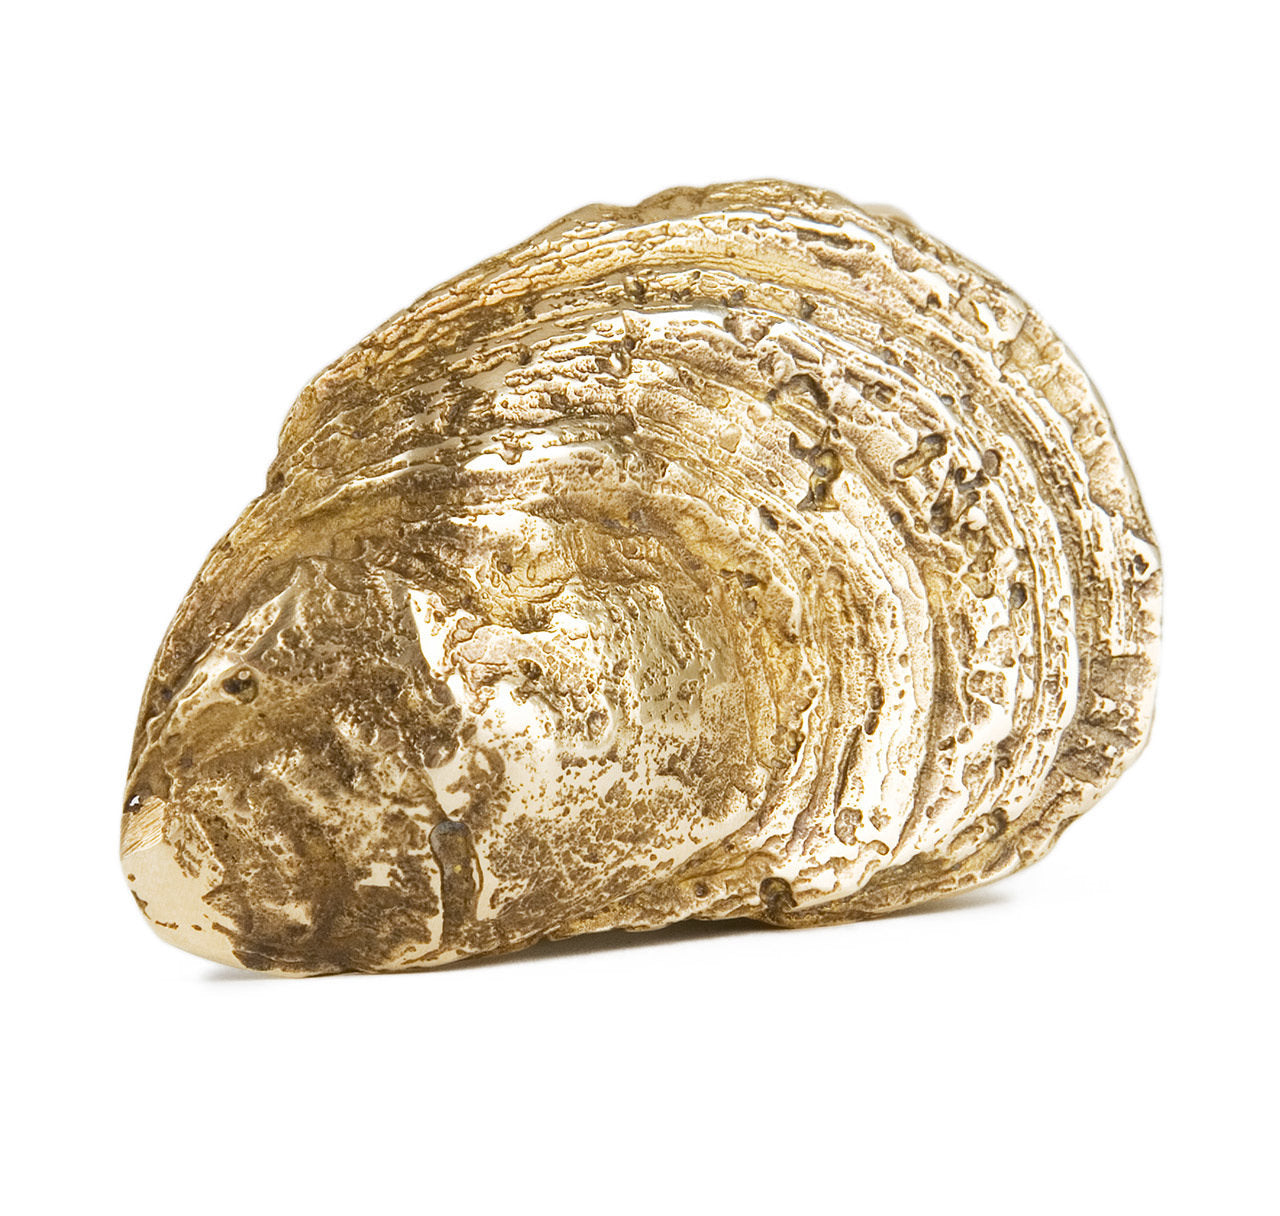 Sir Jack's Oyster Shell Buckle with Brown Leather Belt